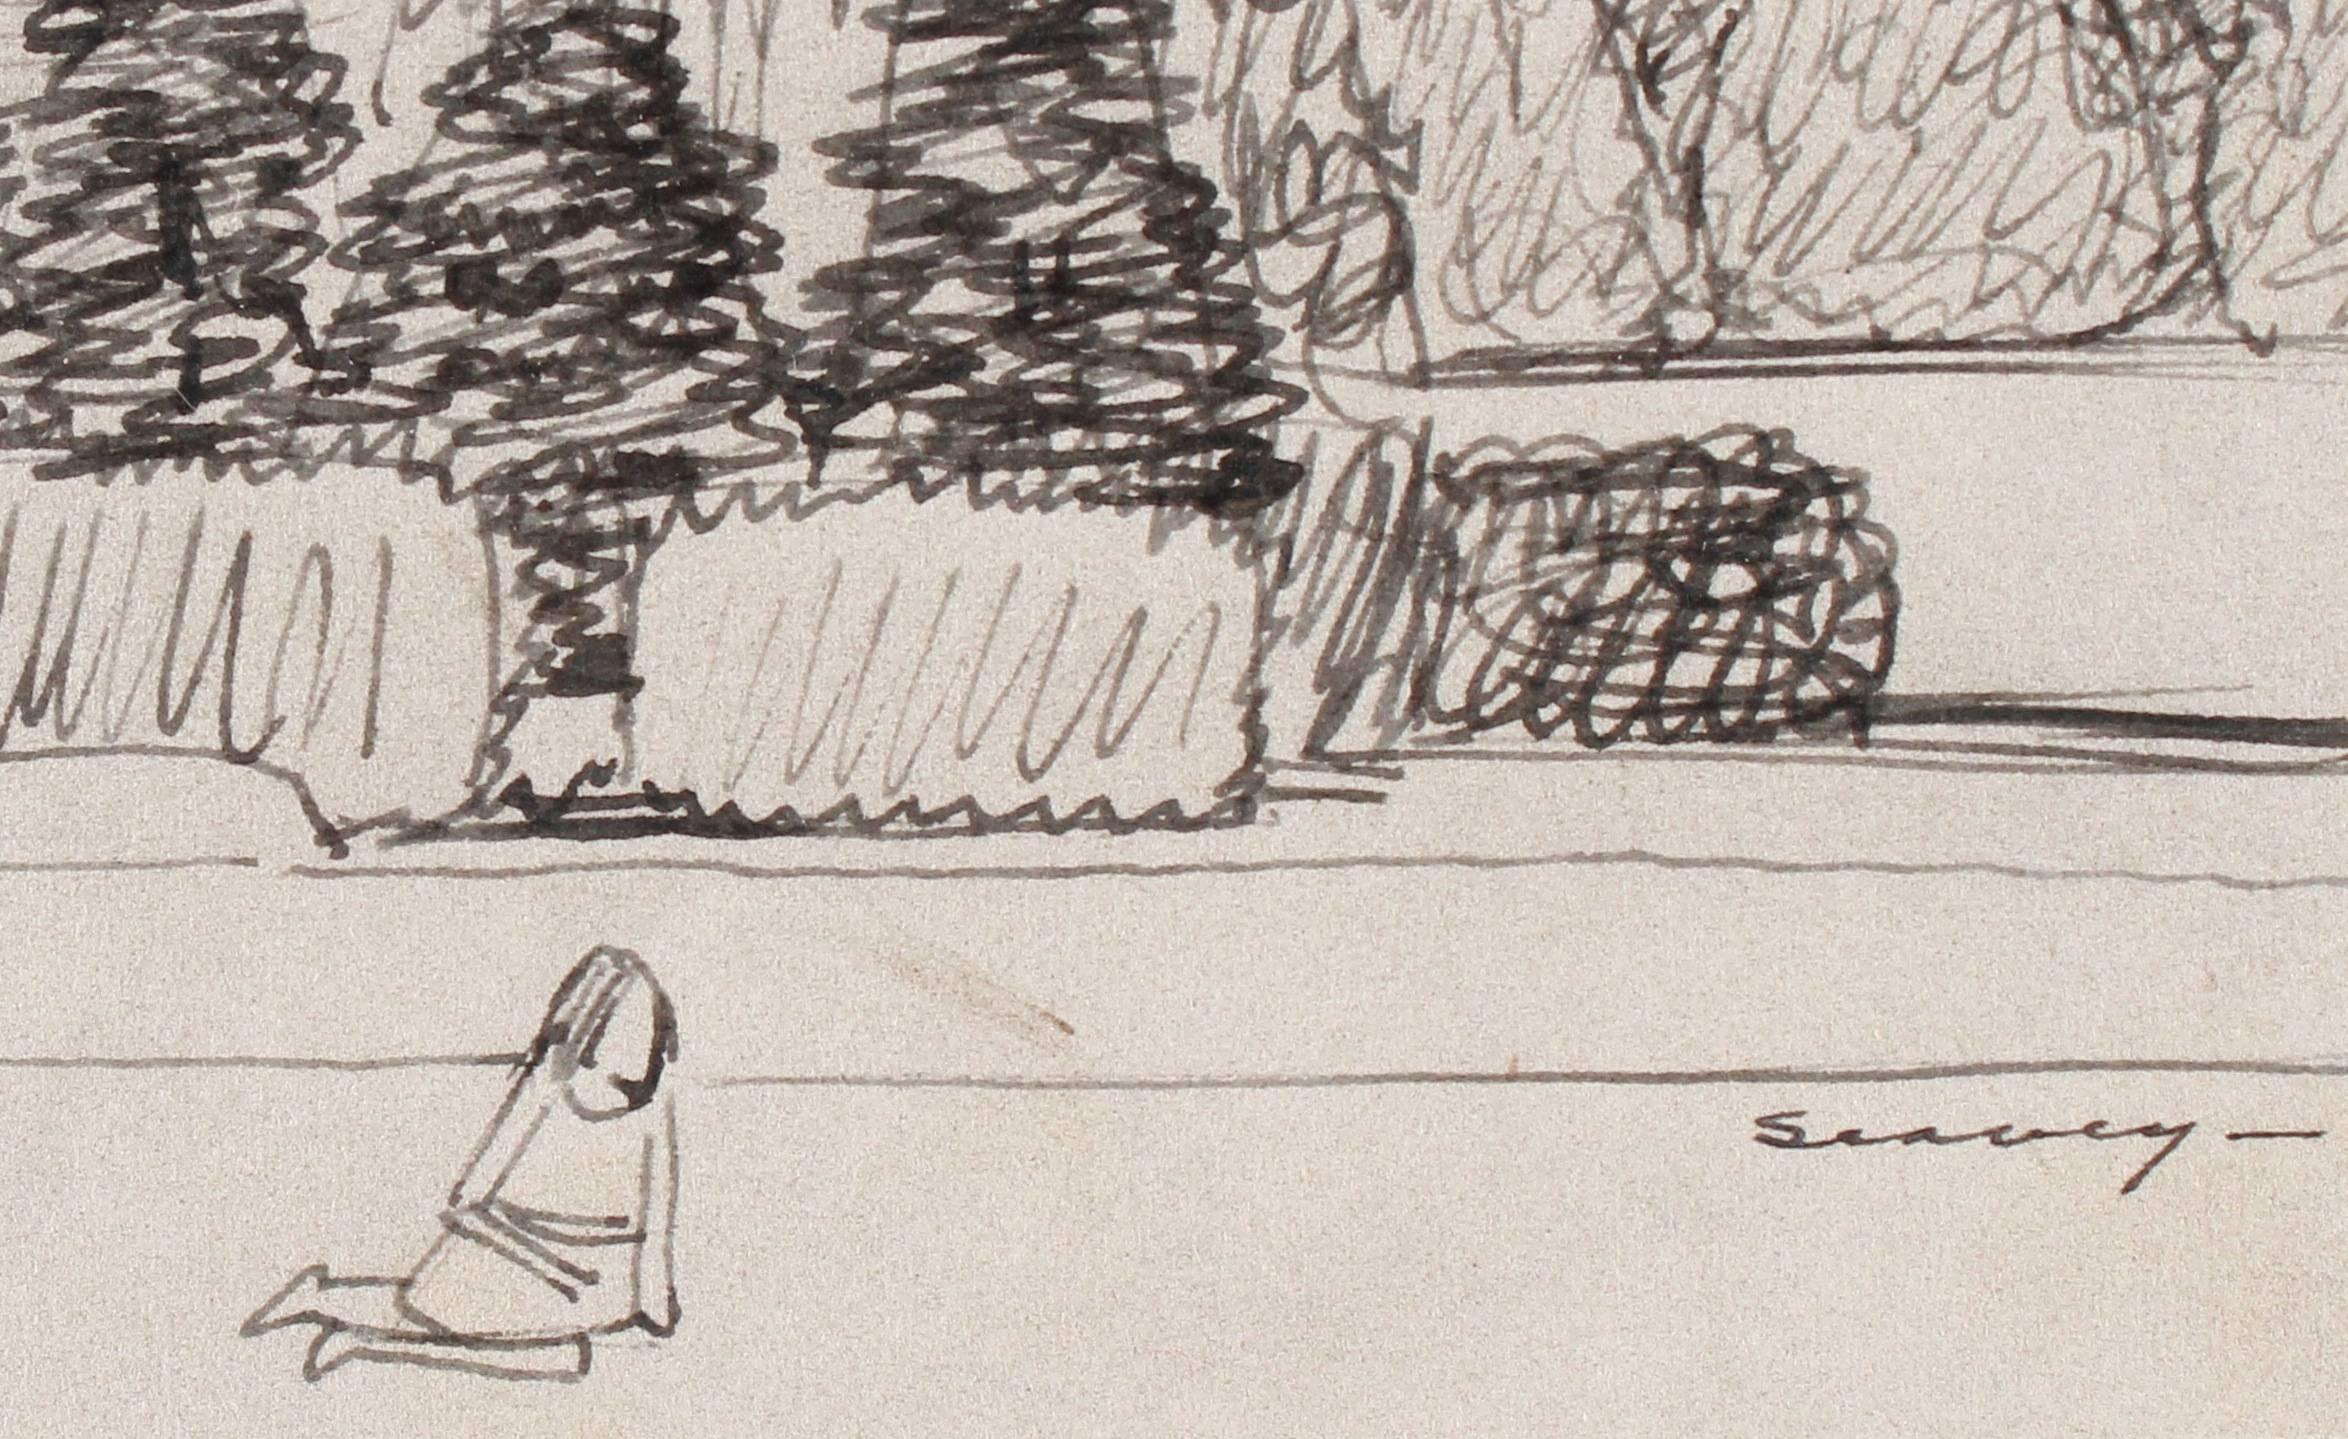 San Francisco City Park, Late 1930s, Ink on Paper Drawing - Art by Clyde F. Seavey Sr.